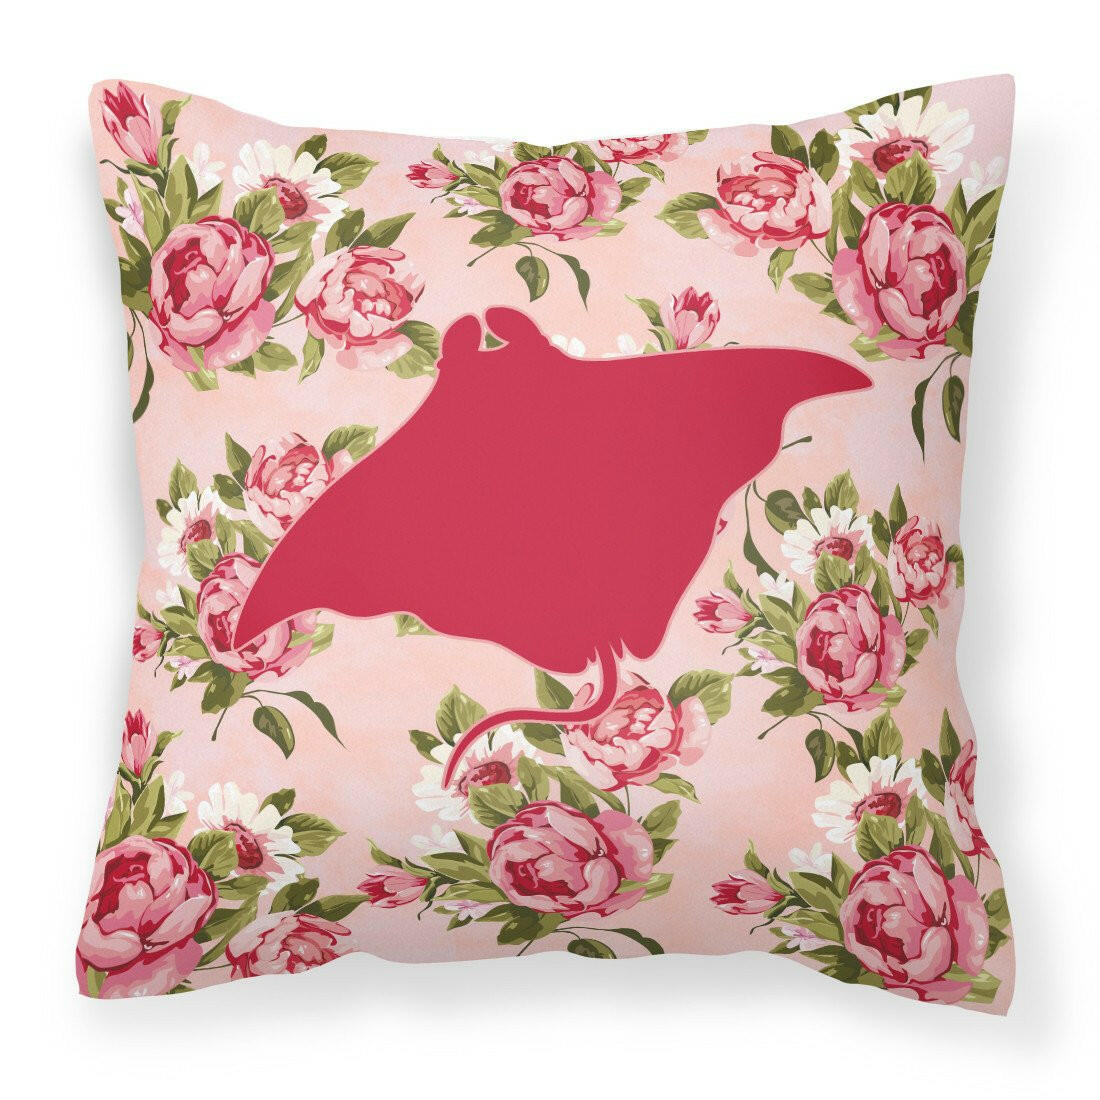 Manta ray Shabby Chic Pink Roses  Fabric Decorative Pillow BB1014-RS-PK-PW1414 - the-store.com